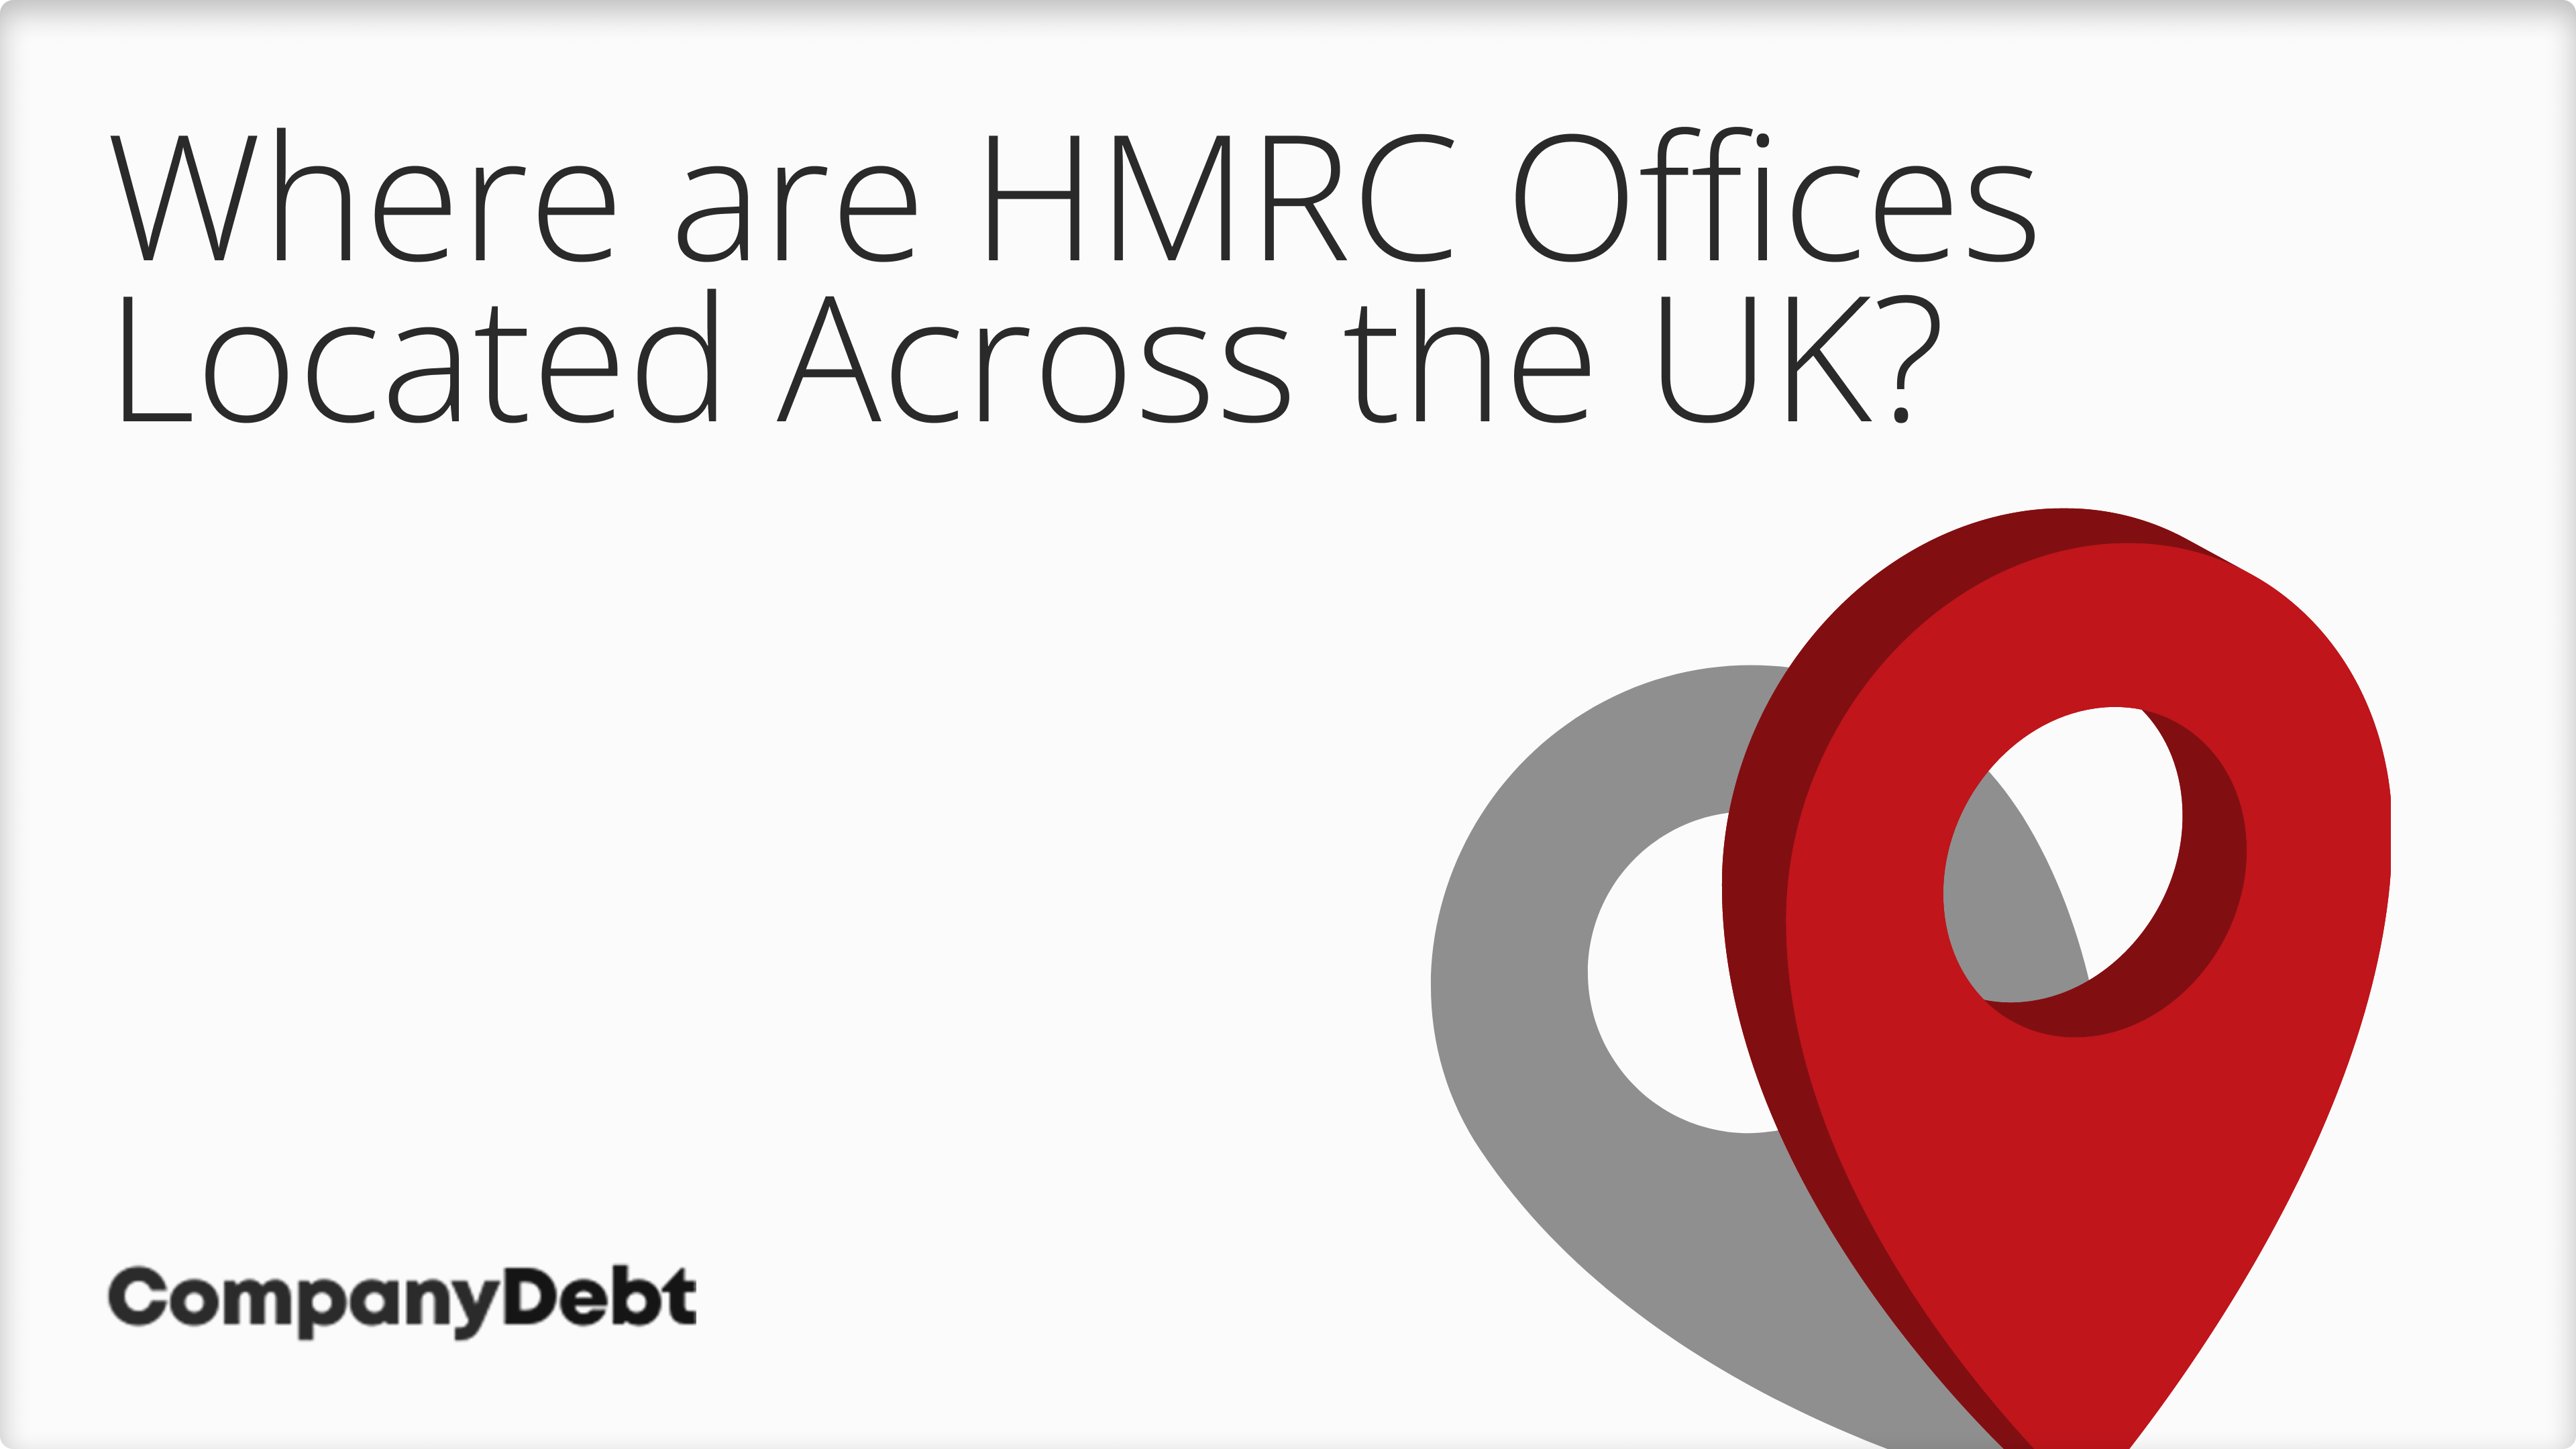 Where are HMRC Offices Located Across the UK?